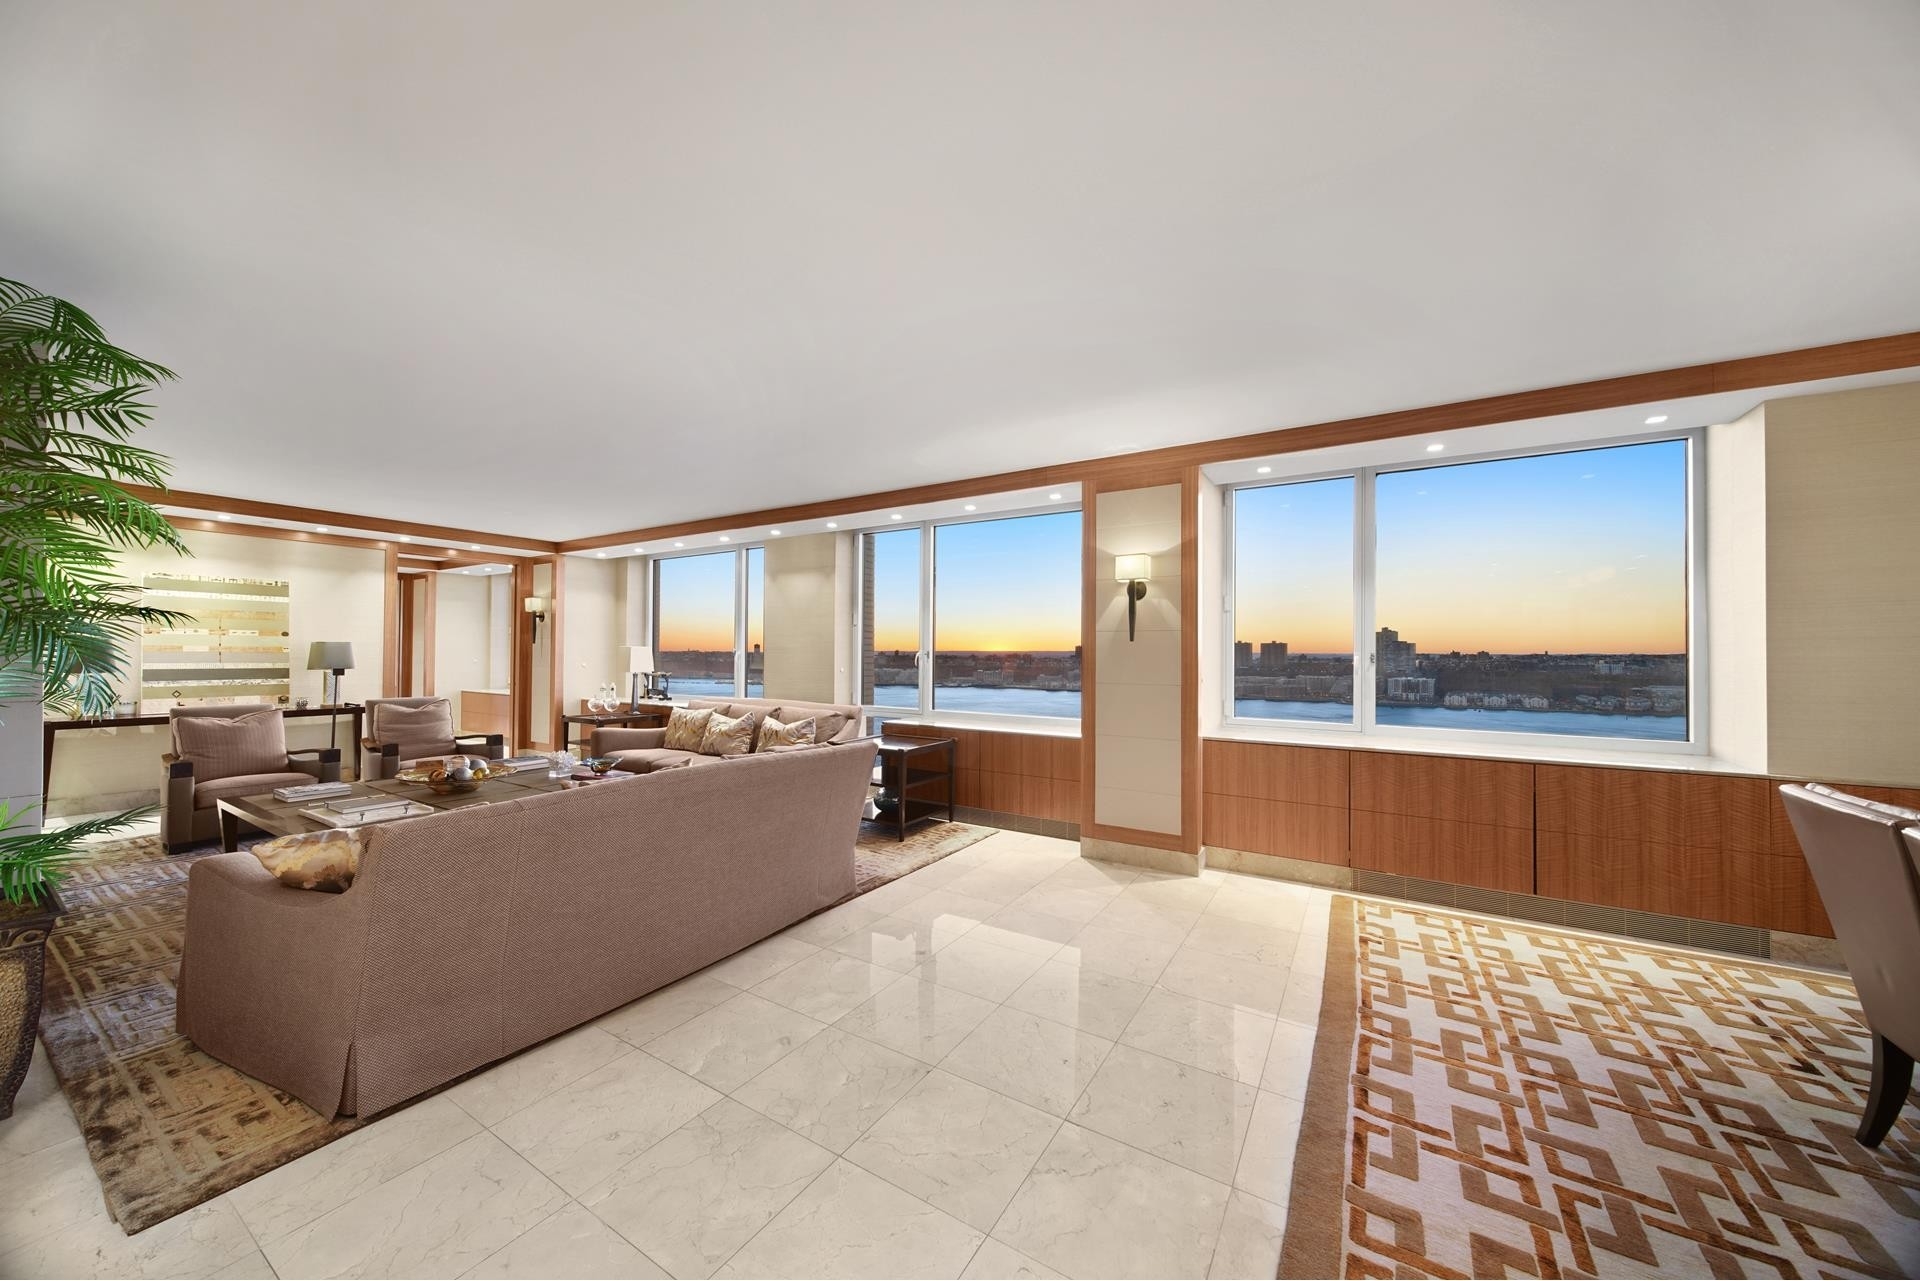 15. Condominiums for Sale at The Avery, 100 RIVERSIDE BLVD, 26THFLOOR Lincoln Square, New York, NY 10069